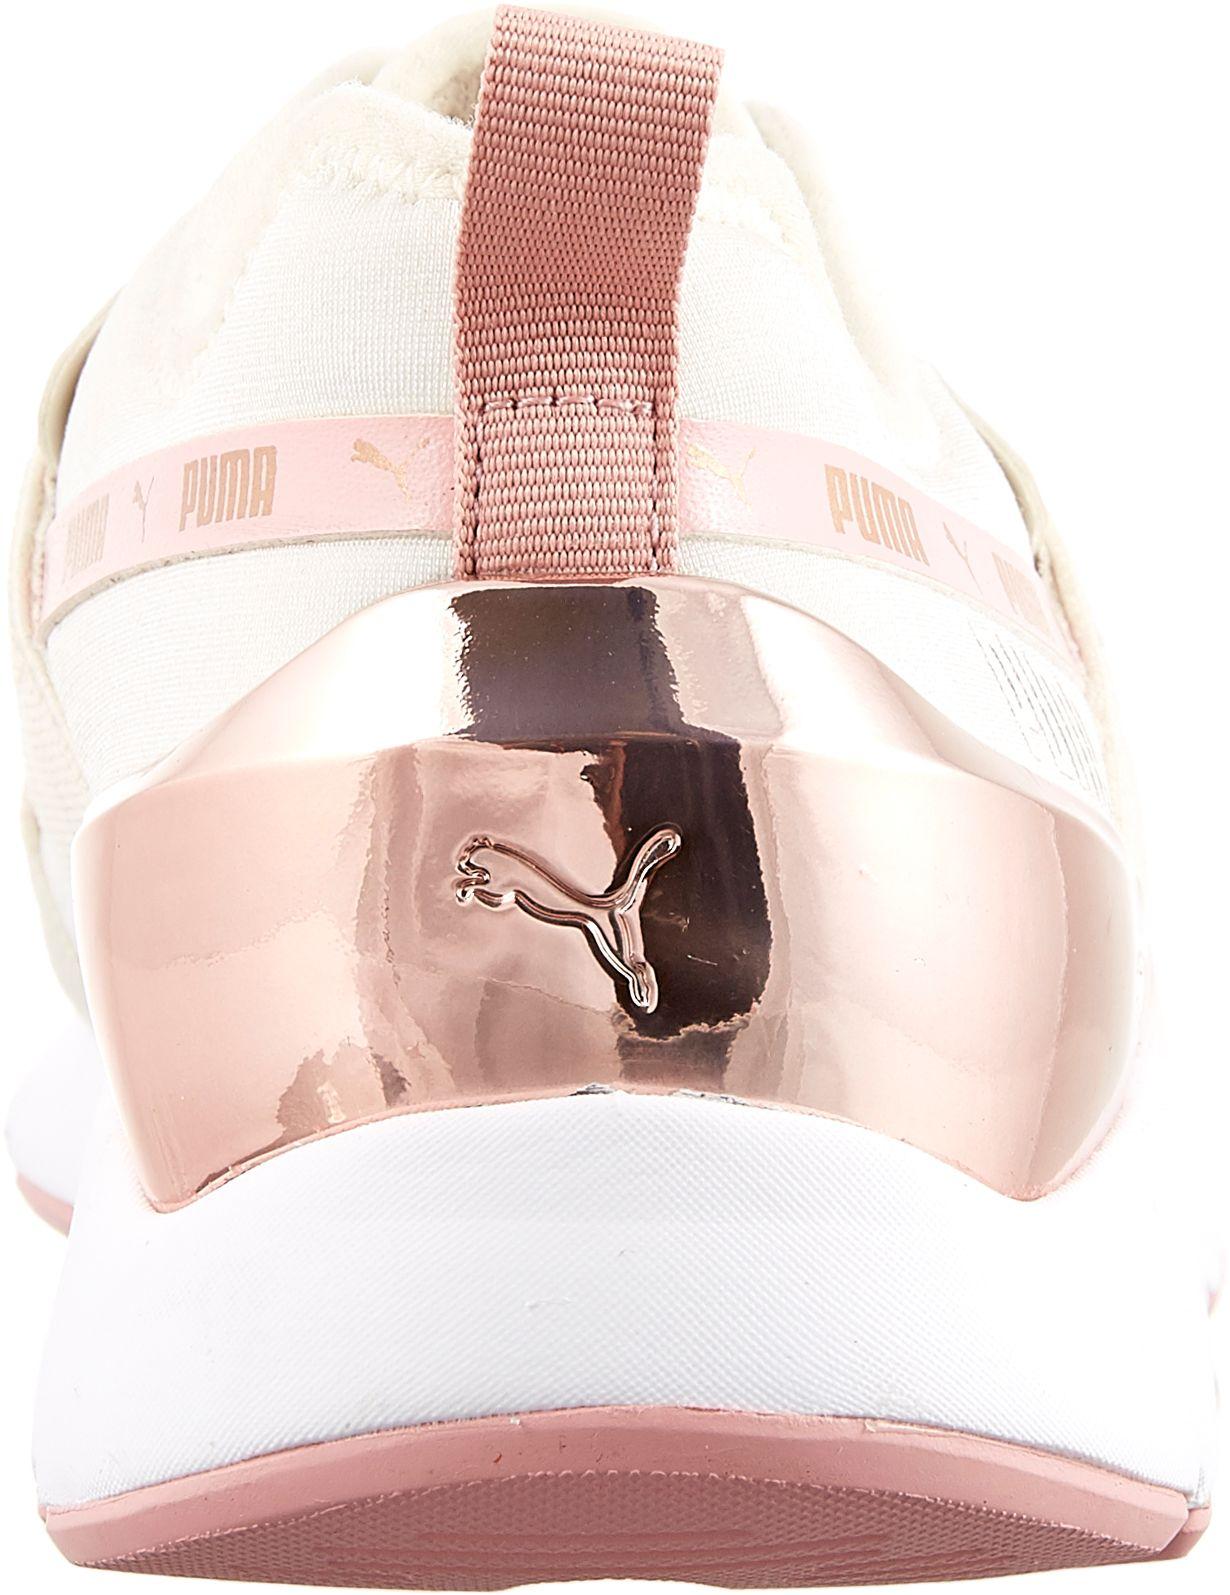 PUMA Muse X-2 Metallic Shoes in Pink/Rose/Gold (Pink) - Lyst